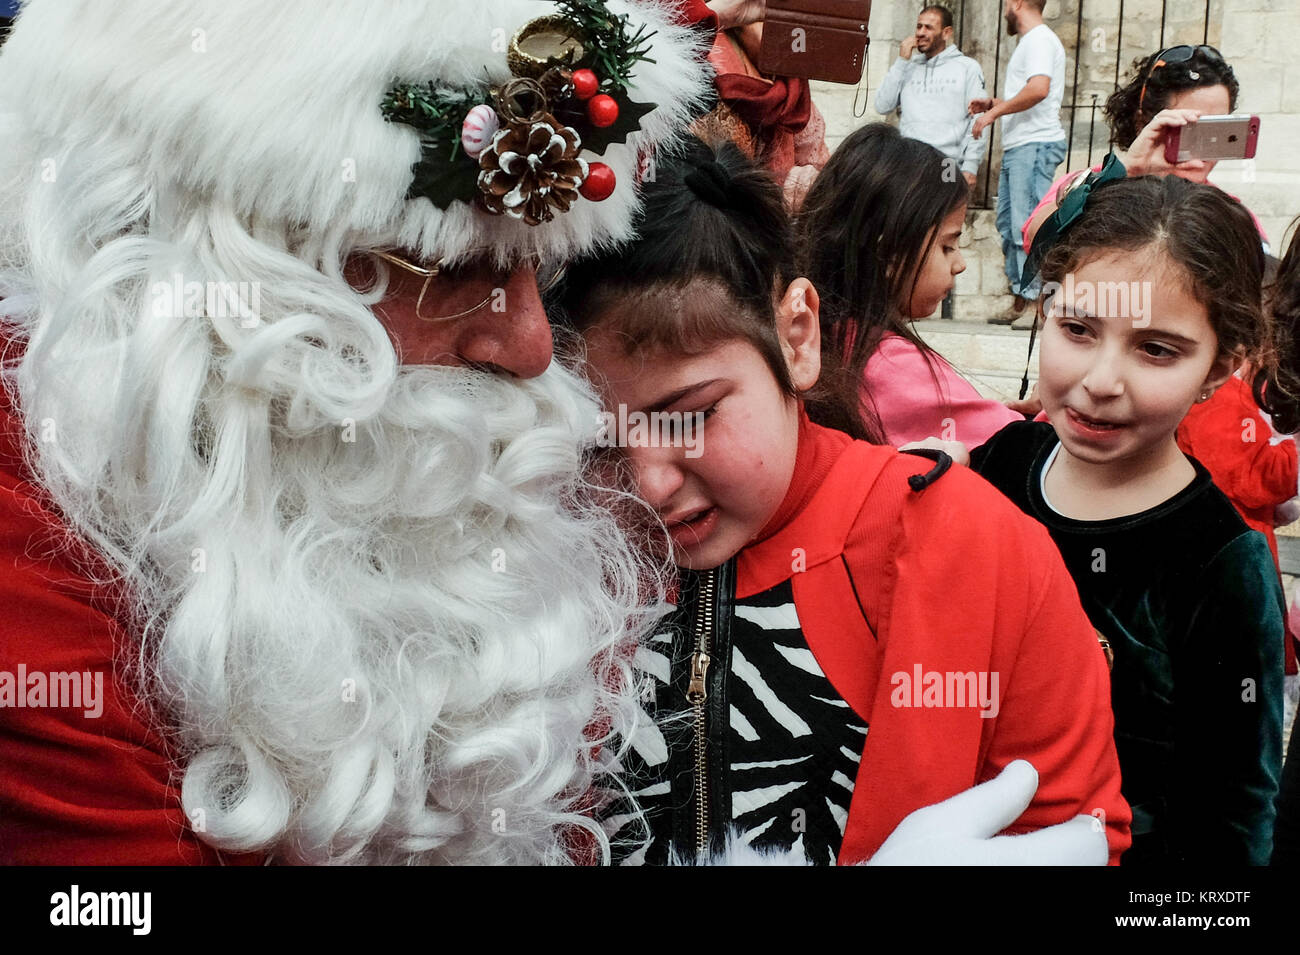 Jerusalem, Israel. 21st December, 2017. Santa Claus, or 'Baba Noel' as he is called in Arabic, comforts a crying young girl near Jerusalem's Old City Jaffa Gate. The Jerusalem Municipality and the Jewish National Fund distributed specially grown Arizona Cypress Christmas trees to the Christian population at the Jaffa Gate. Credit: Nir Alon/Alamy Live News Stock Photo